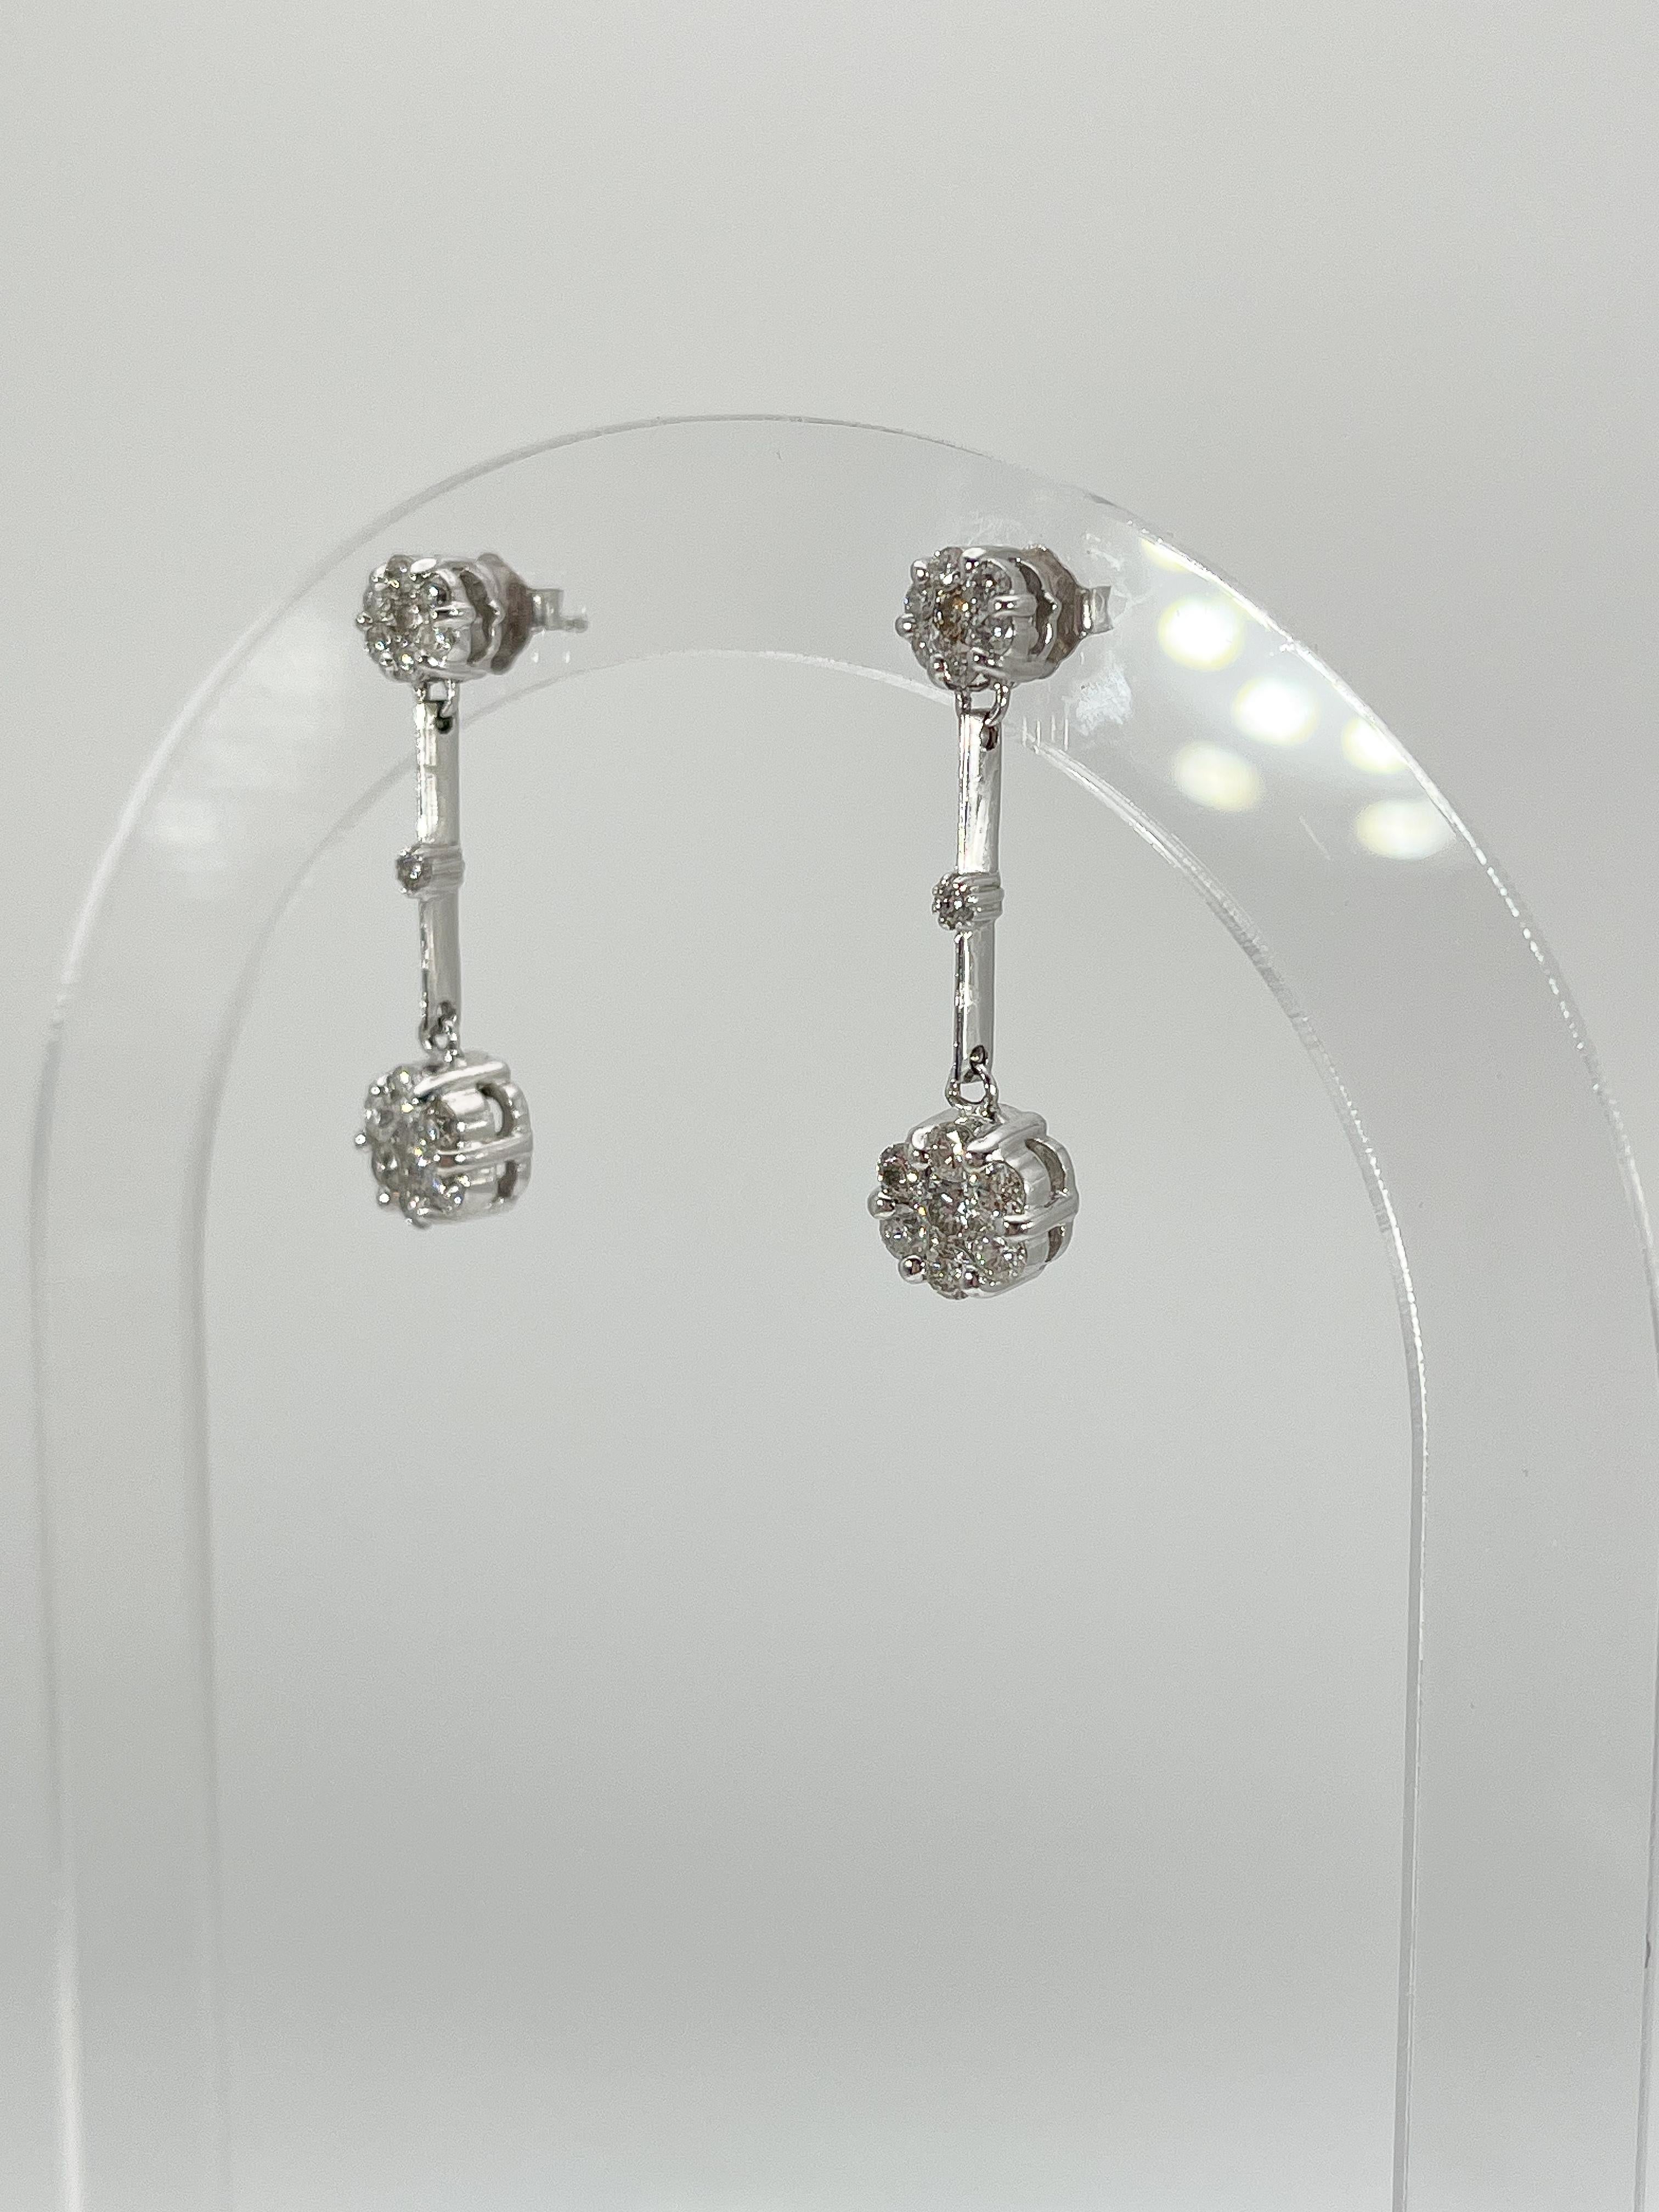 14K White Gold 1 CTW Diamond Drop Cluster Earrings  In Excellent Condition For Sale In Stuart, FL